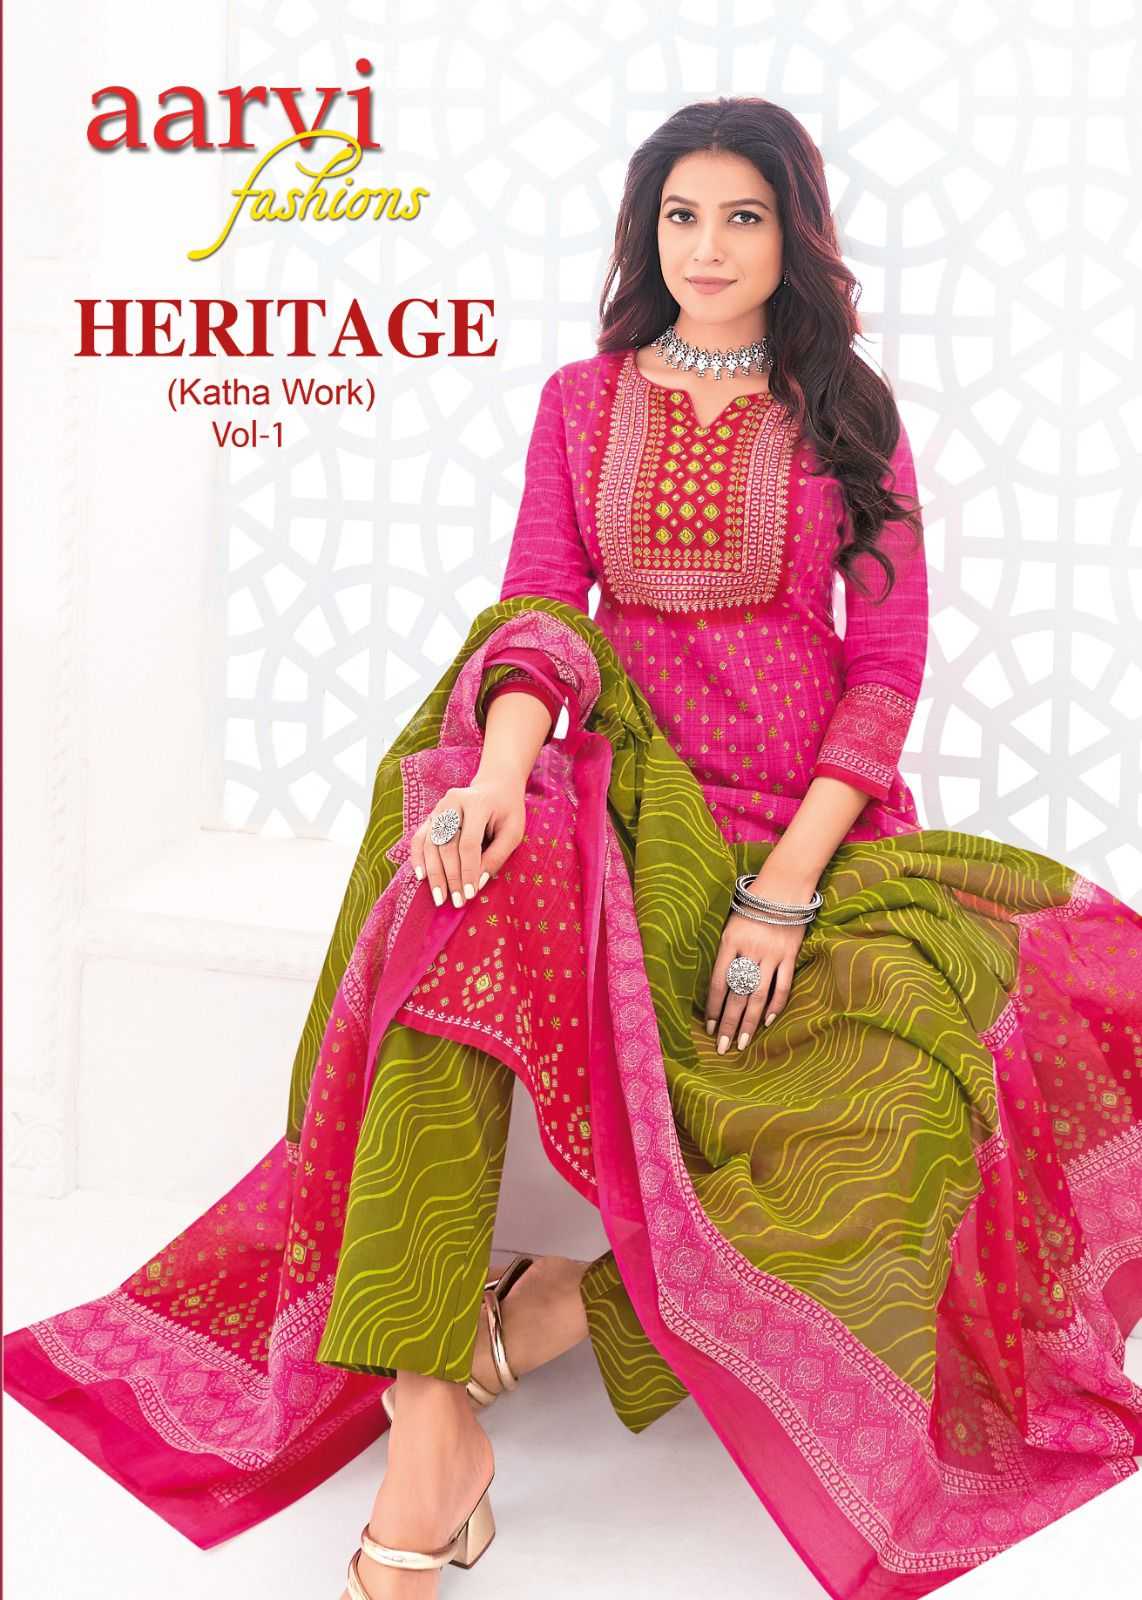 HERITAGE VOL 1 BY AARVI FASHION READYMADE SUITS EXPORTS